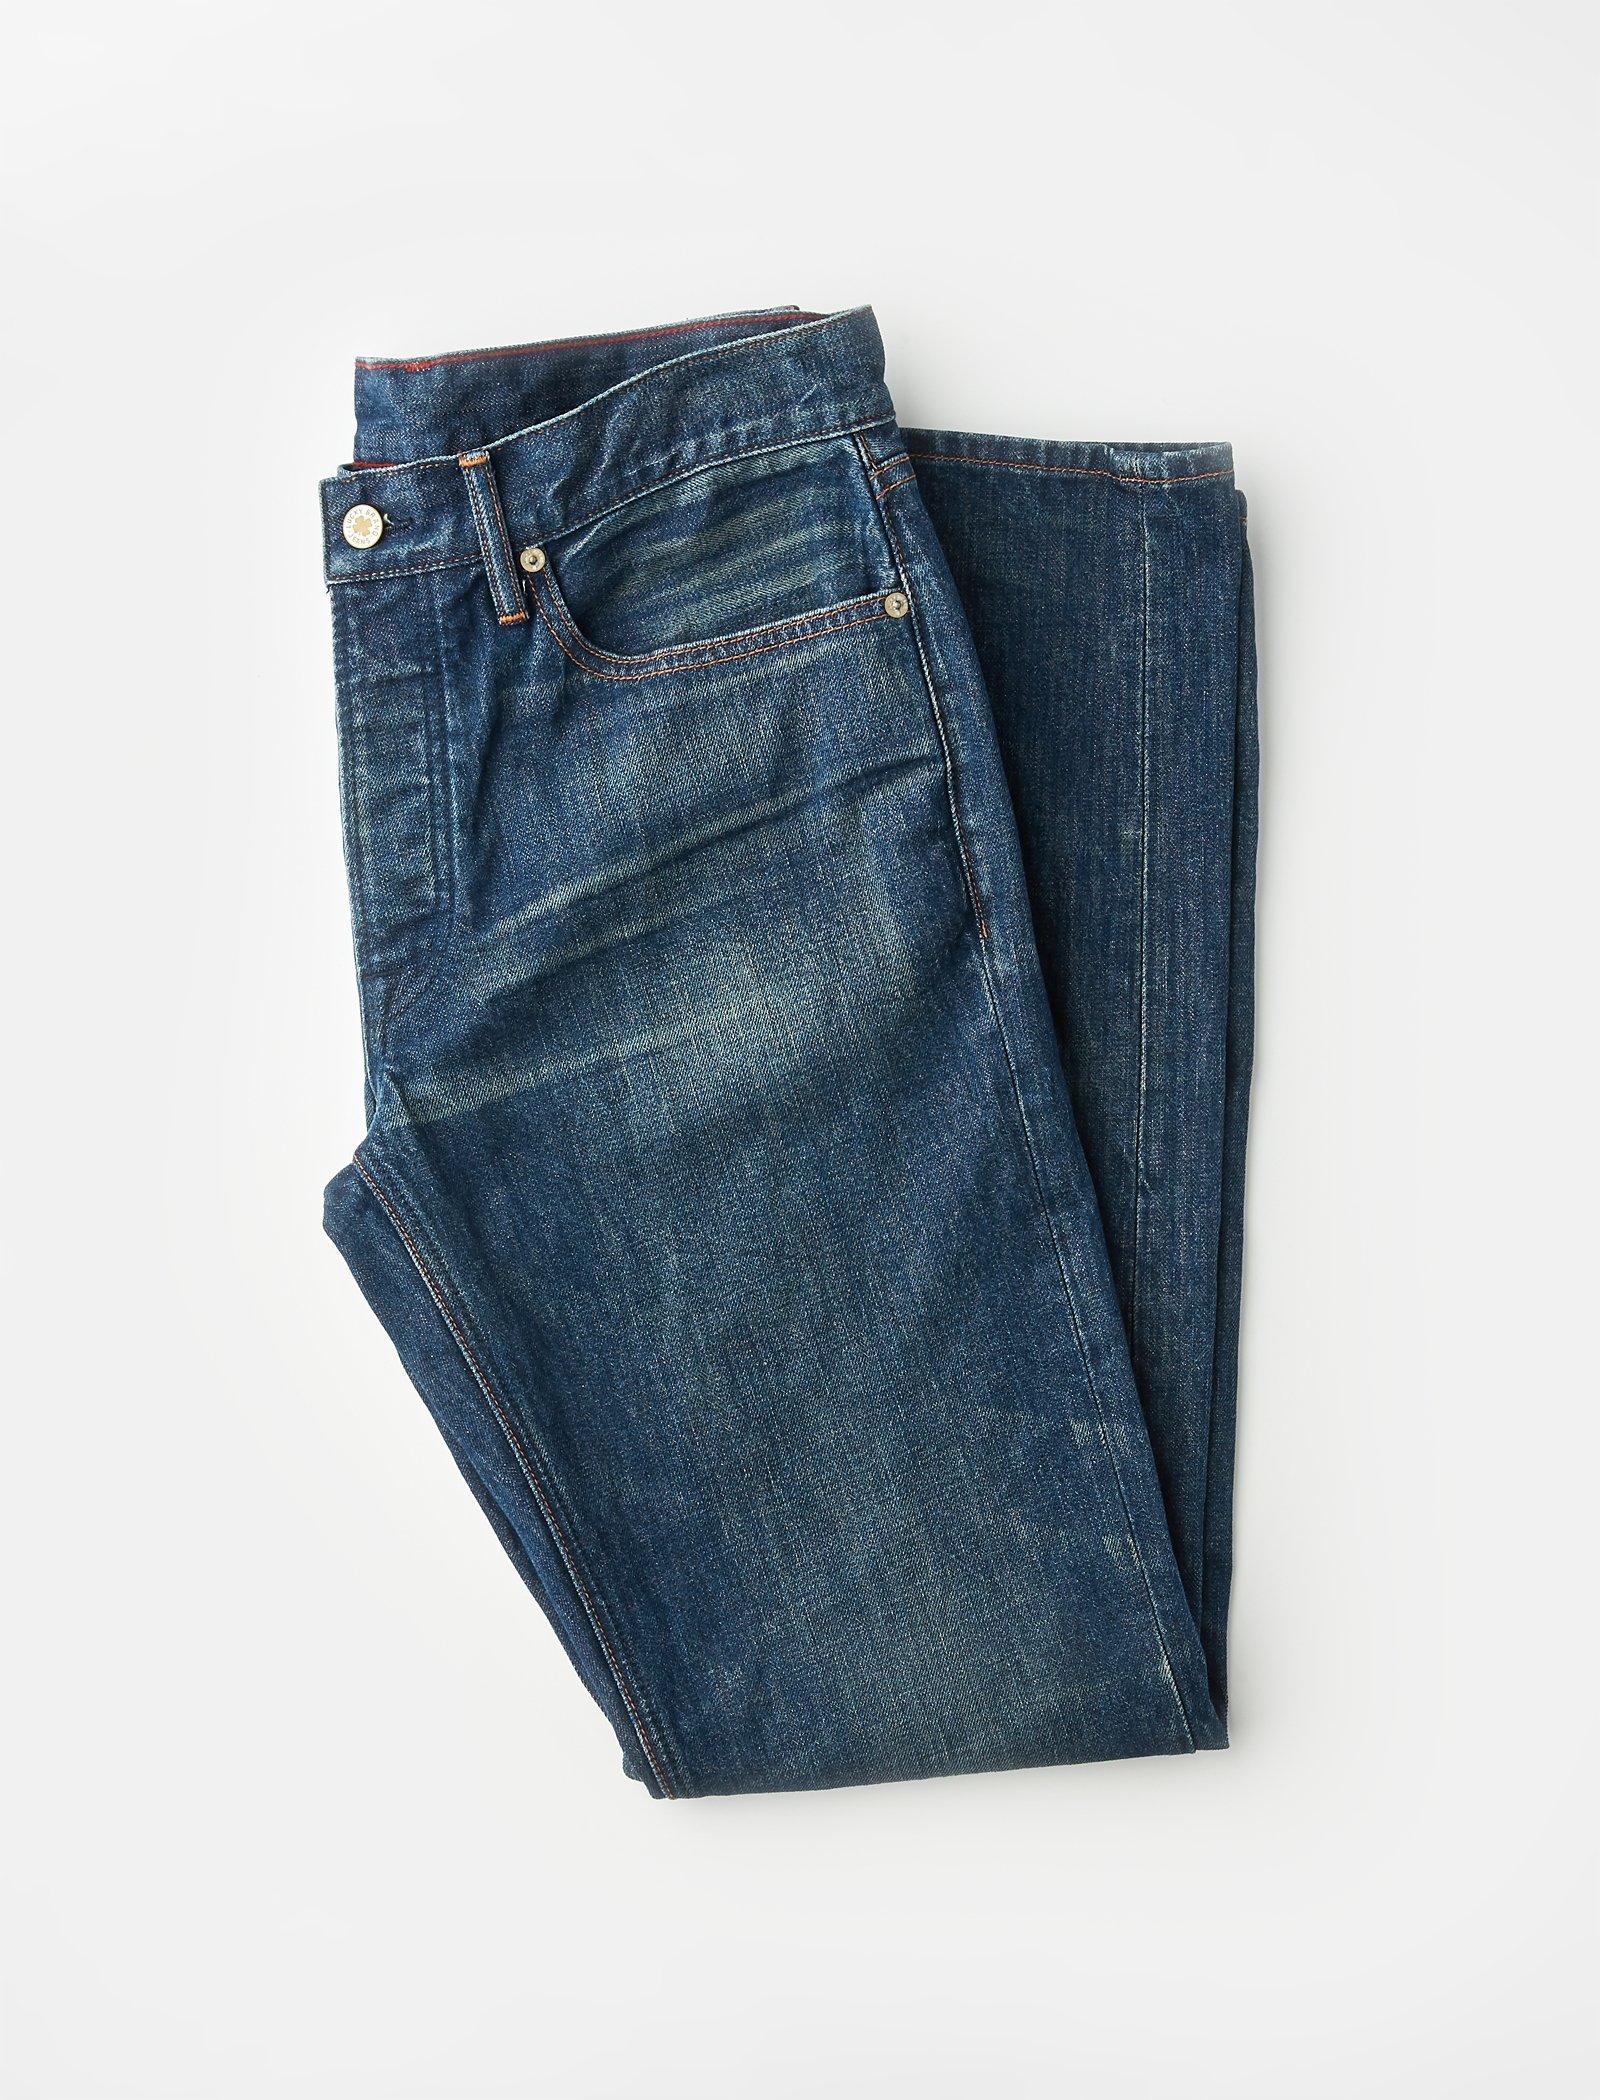 MADE IN L.A. 121 HERITAGE SLIM JEAN | Lucky Brand